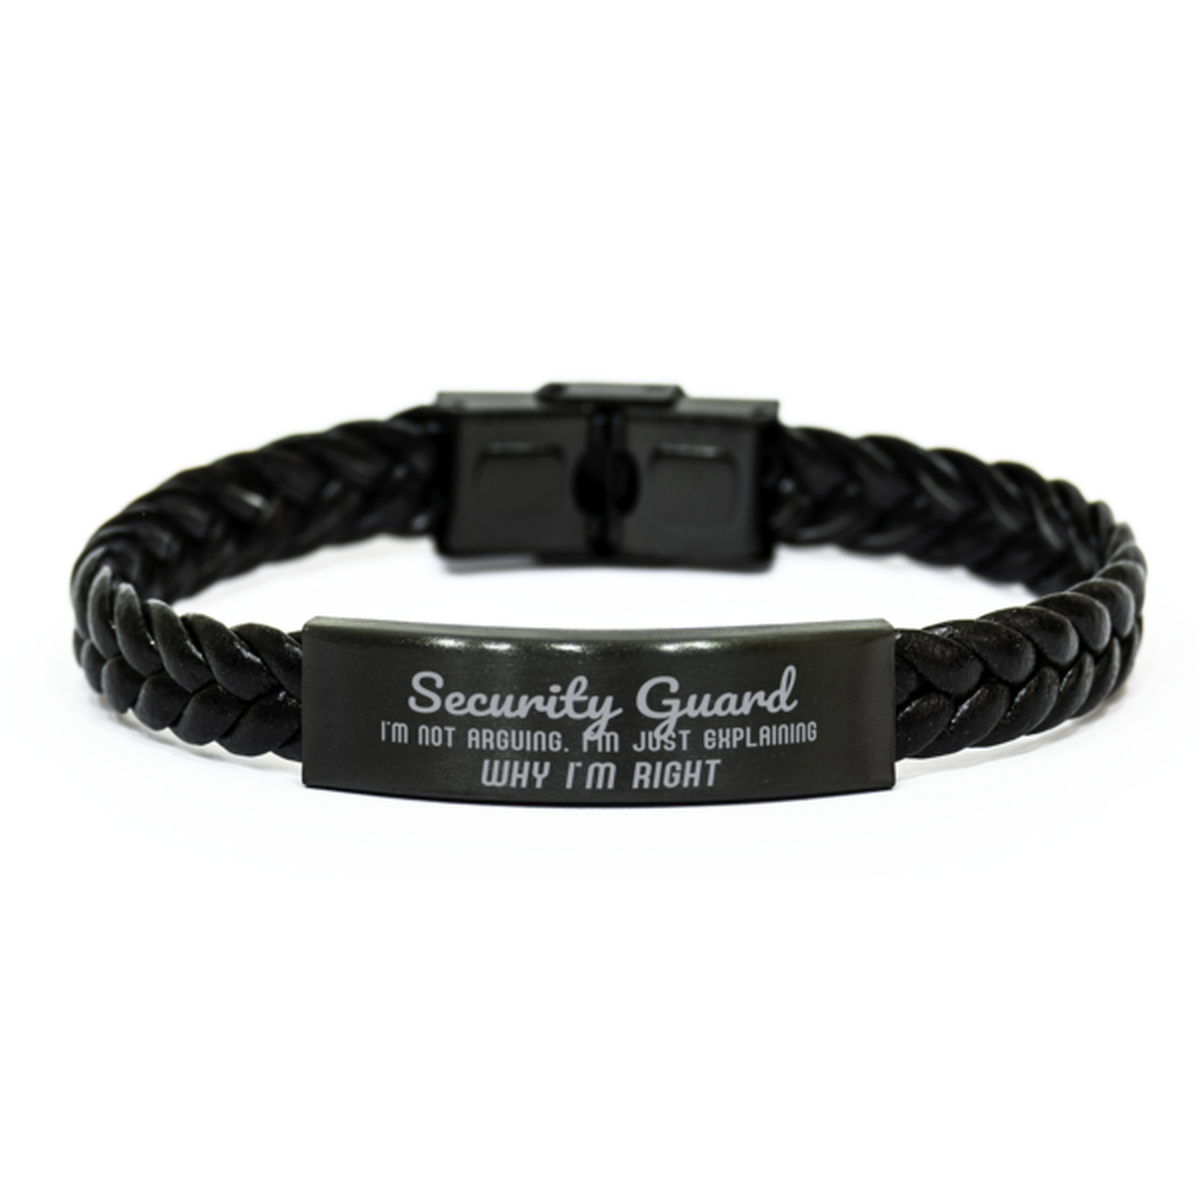 Security Guard I'm not Arguing. I'm Just Explaining Why I'm RIGHT Braided Leather Bracelet, Graduation Birthday Christmas Security Guard Gifts For Security Guard Funny Saying Quote Present for Men Women Coworker